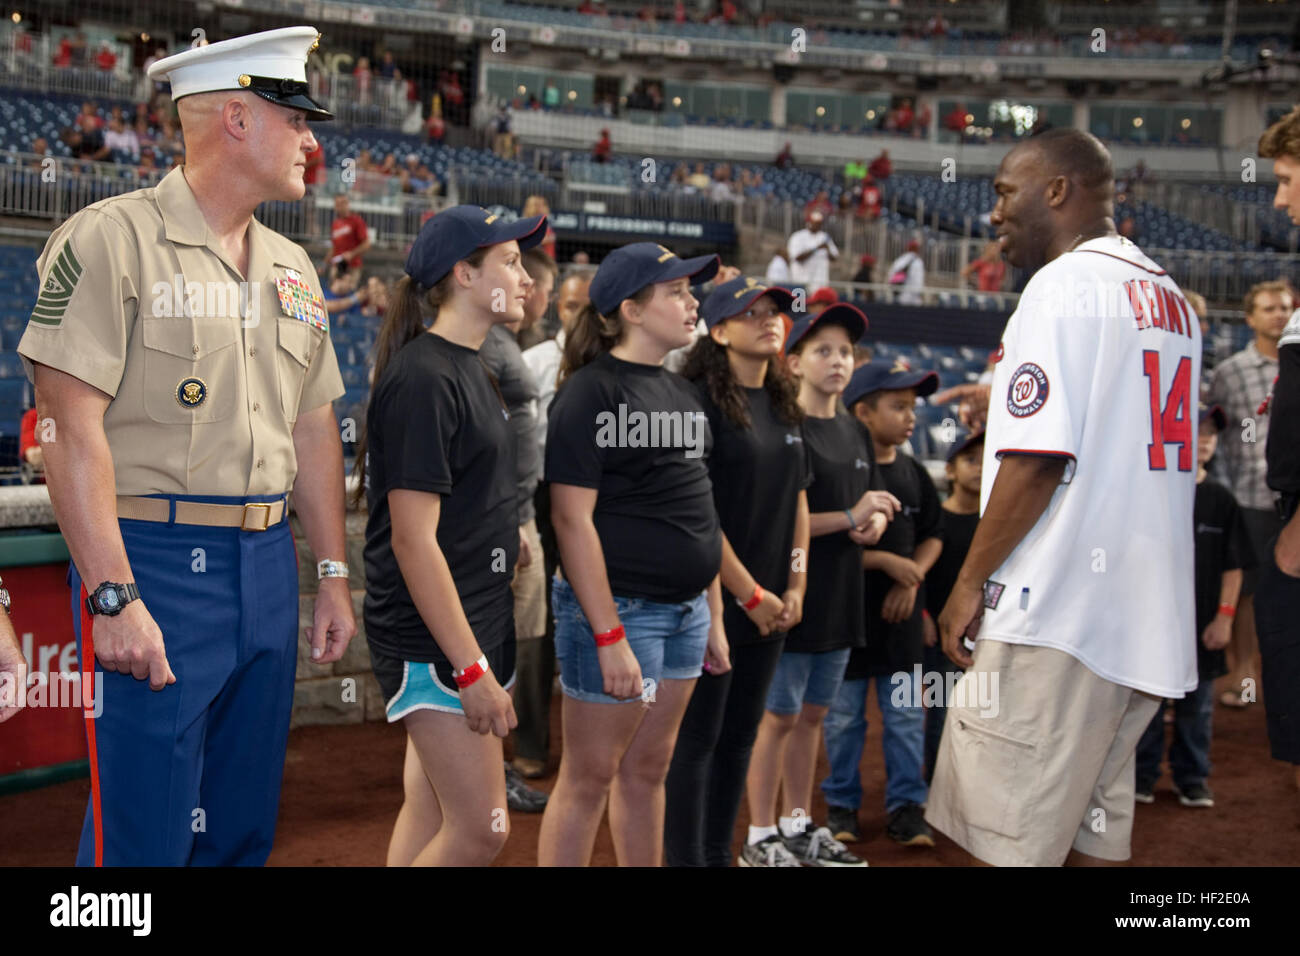 The 17th Sergeant Major of the Marine Corps, Sgt. Maj. Micheal P. Barrett, left, attends the Washington Nationals' Marines Day baseball game in Washington, D.C., Aug. 20, 2014. (U.S. Marine Corps photo by Lance Cpl. Samantha K. Draughon/Released) Sergeant Major of the Marine Corps Attends Baseball Game 140820-M-EL431-038 Stock Photo